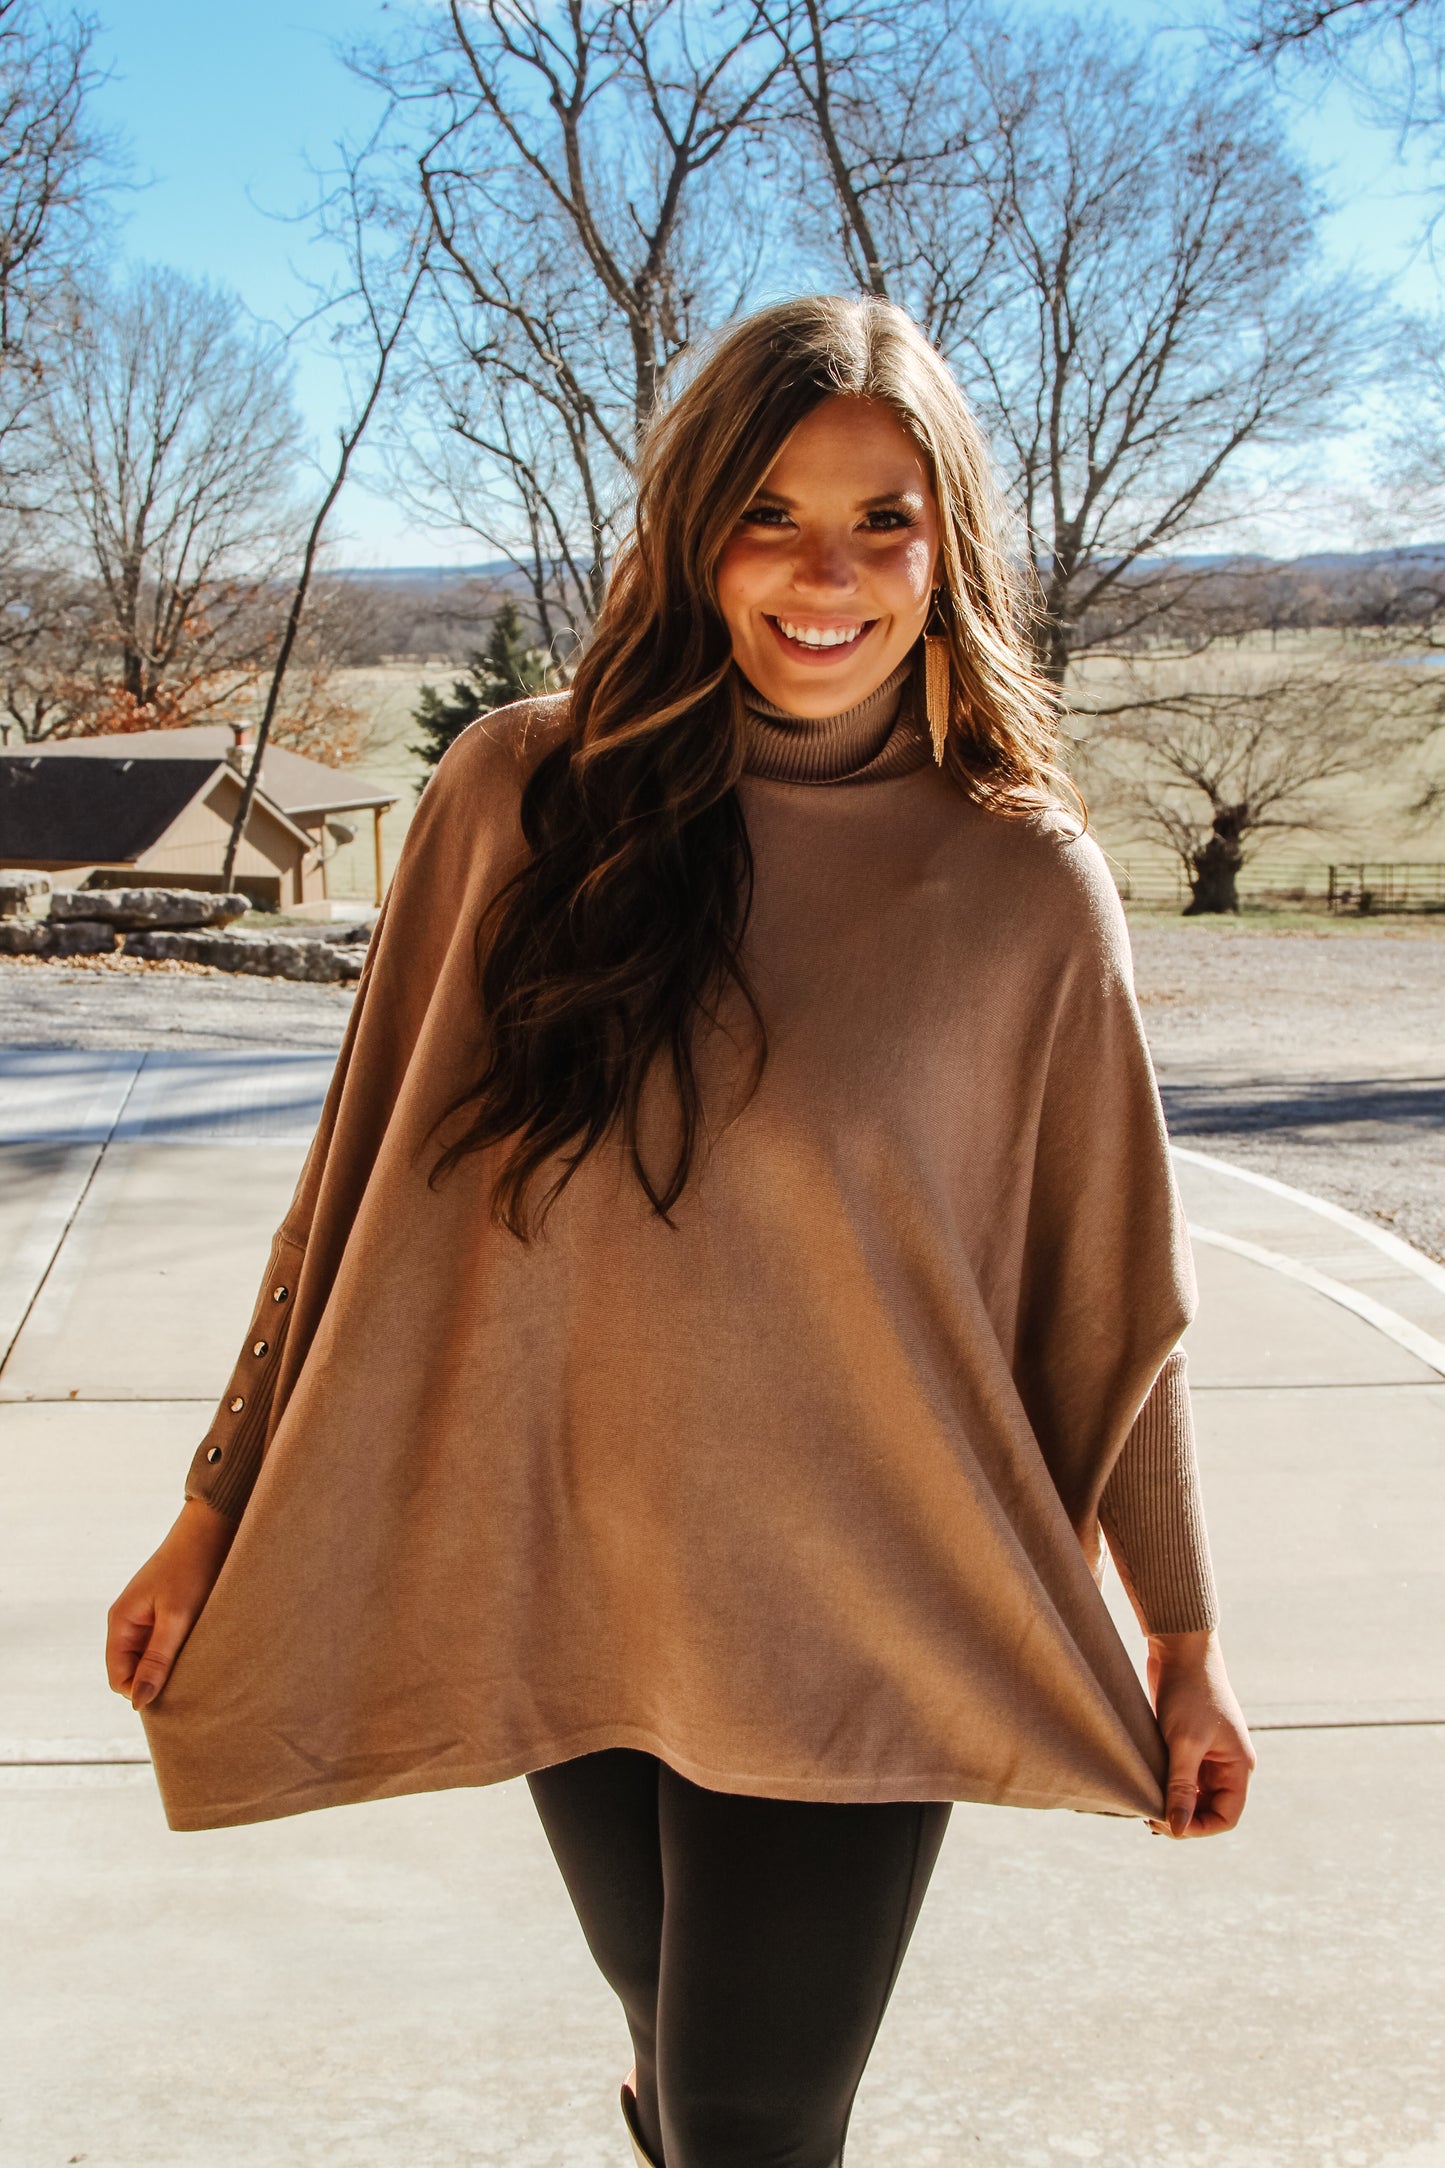 DOLMAN TURTLE NECK TOP in COCO